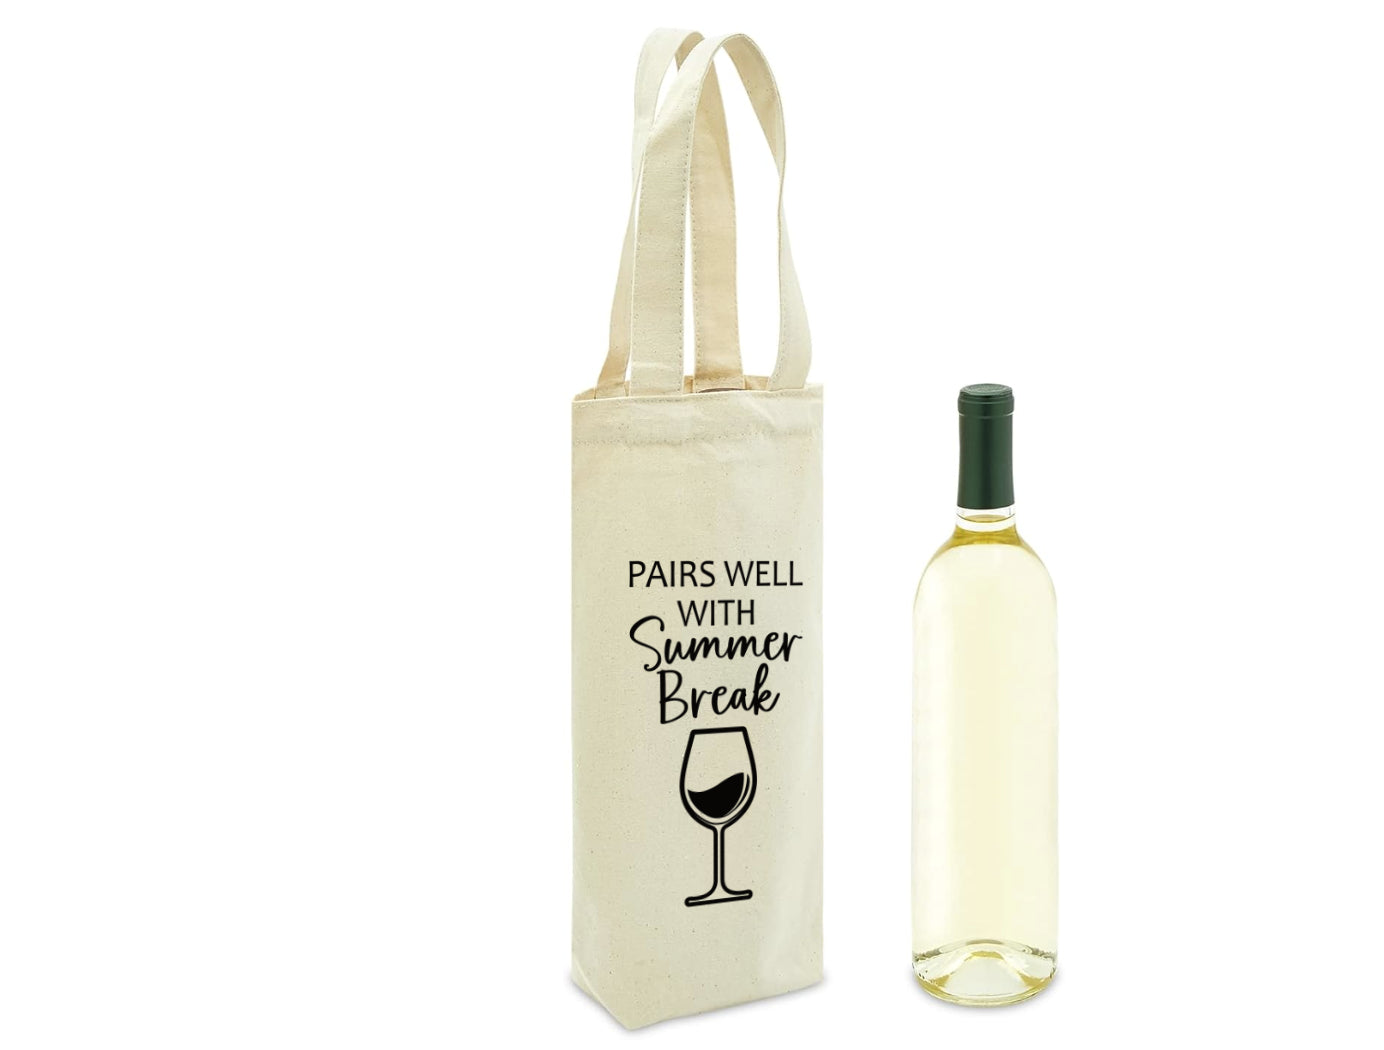 Wine bag says pairs well with summer break - end of year gift for a teacher